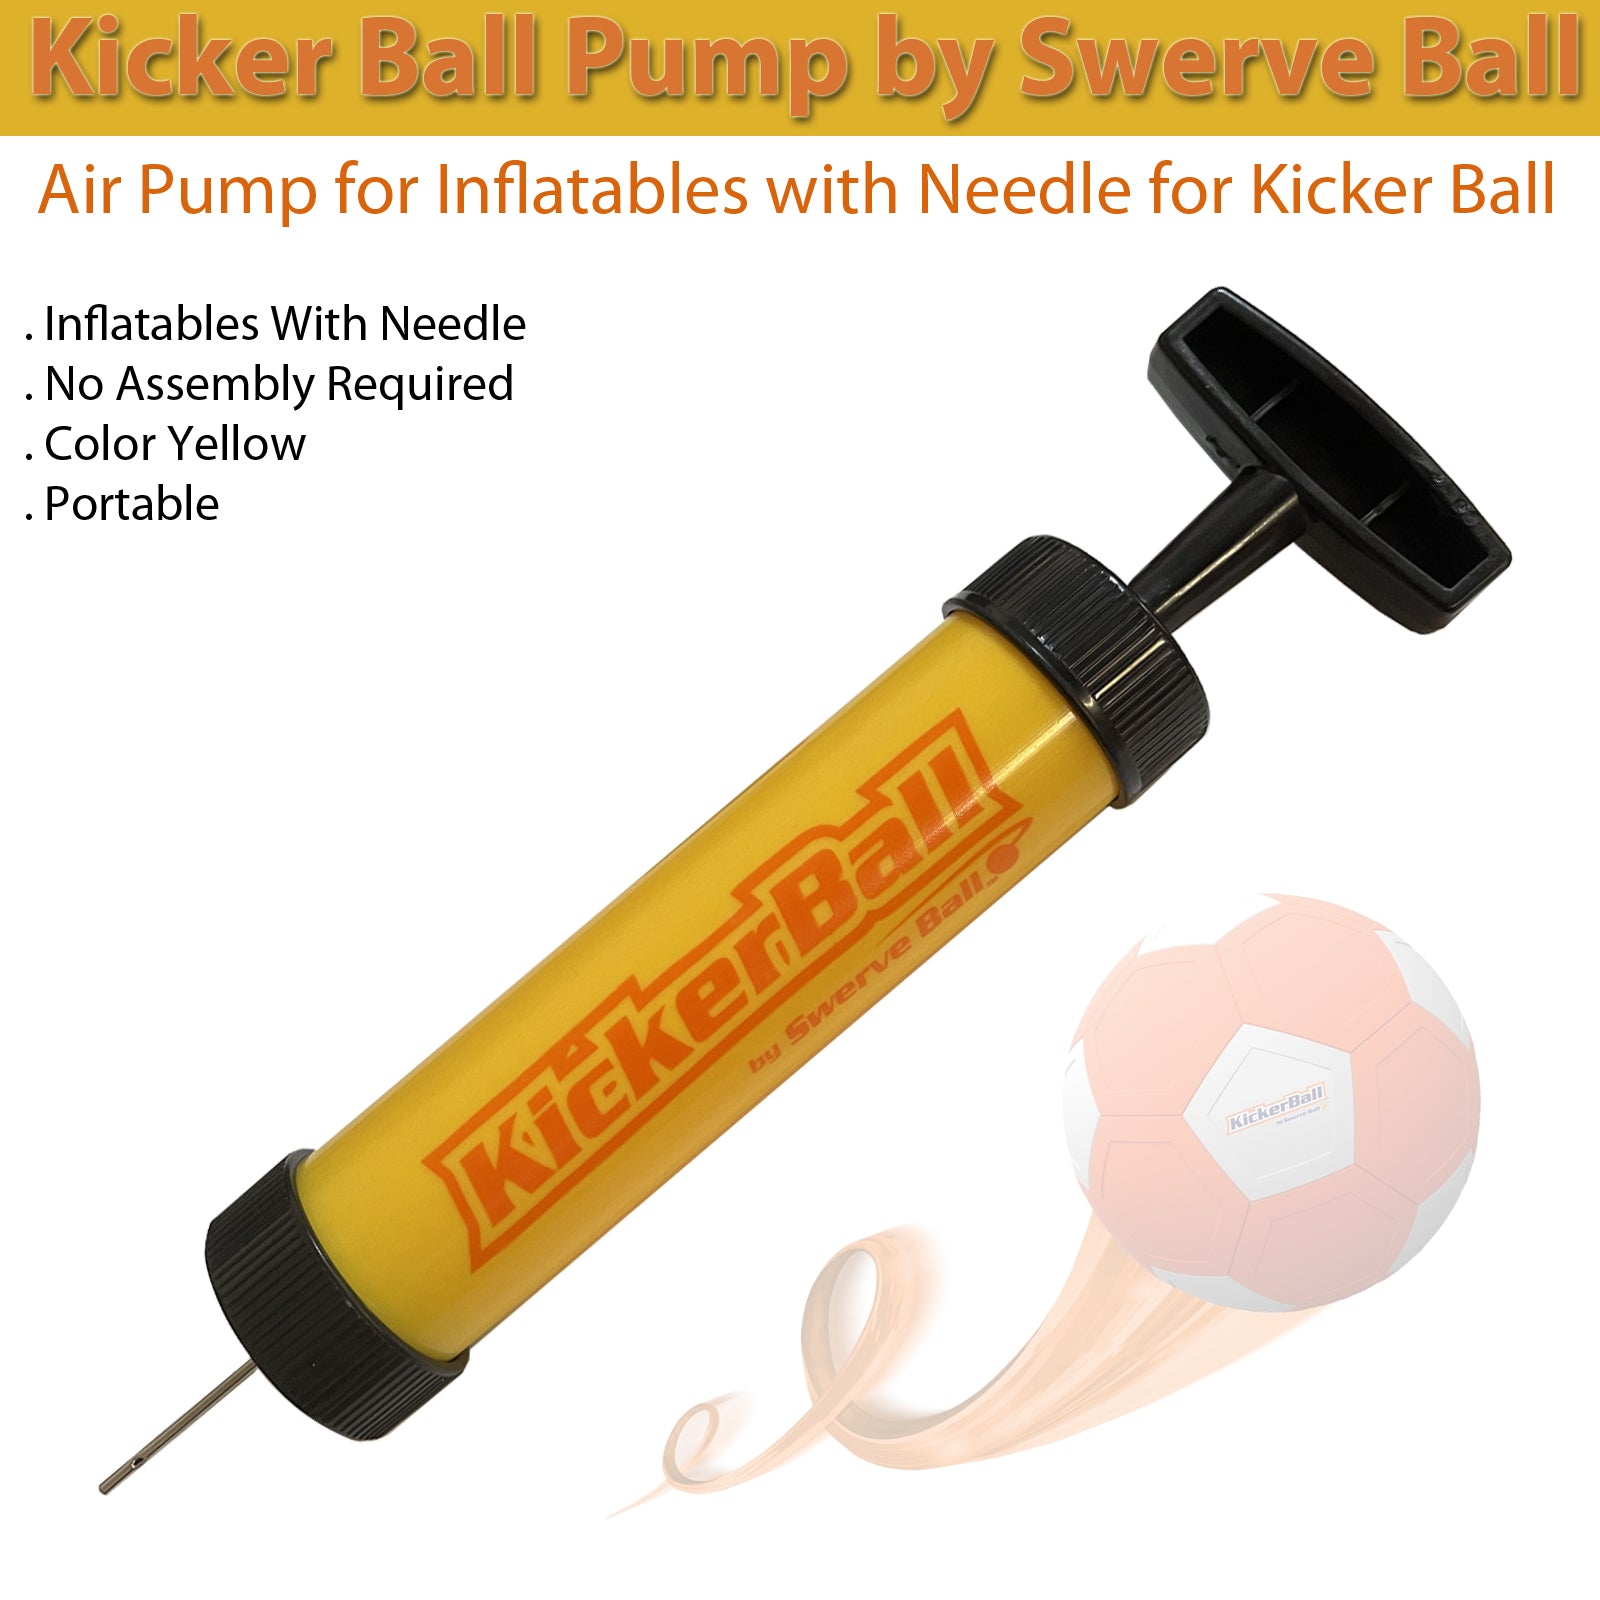 Kicker Ball Pump By Swerve Ball Hand Air Pump With Needle